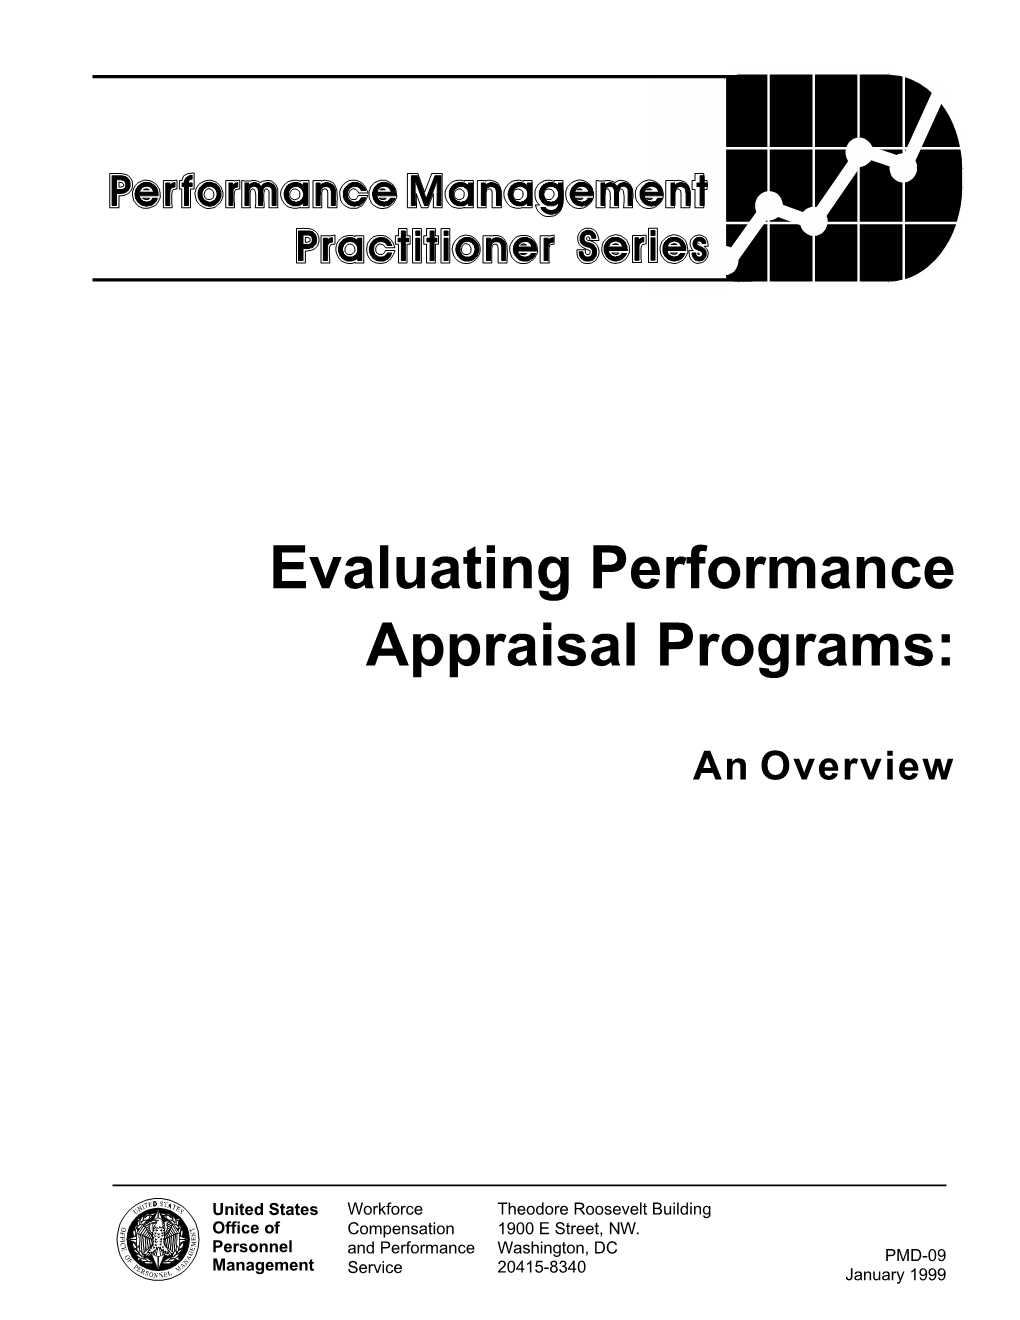 Evaluating Performance Appraisal Programs: an Overview